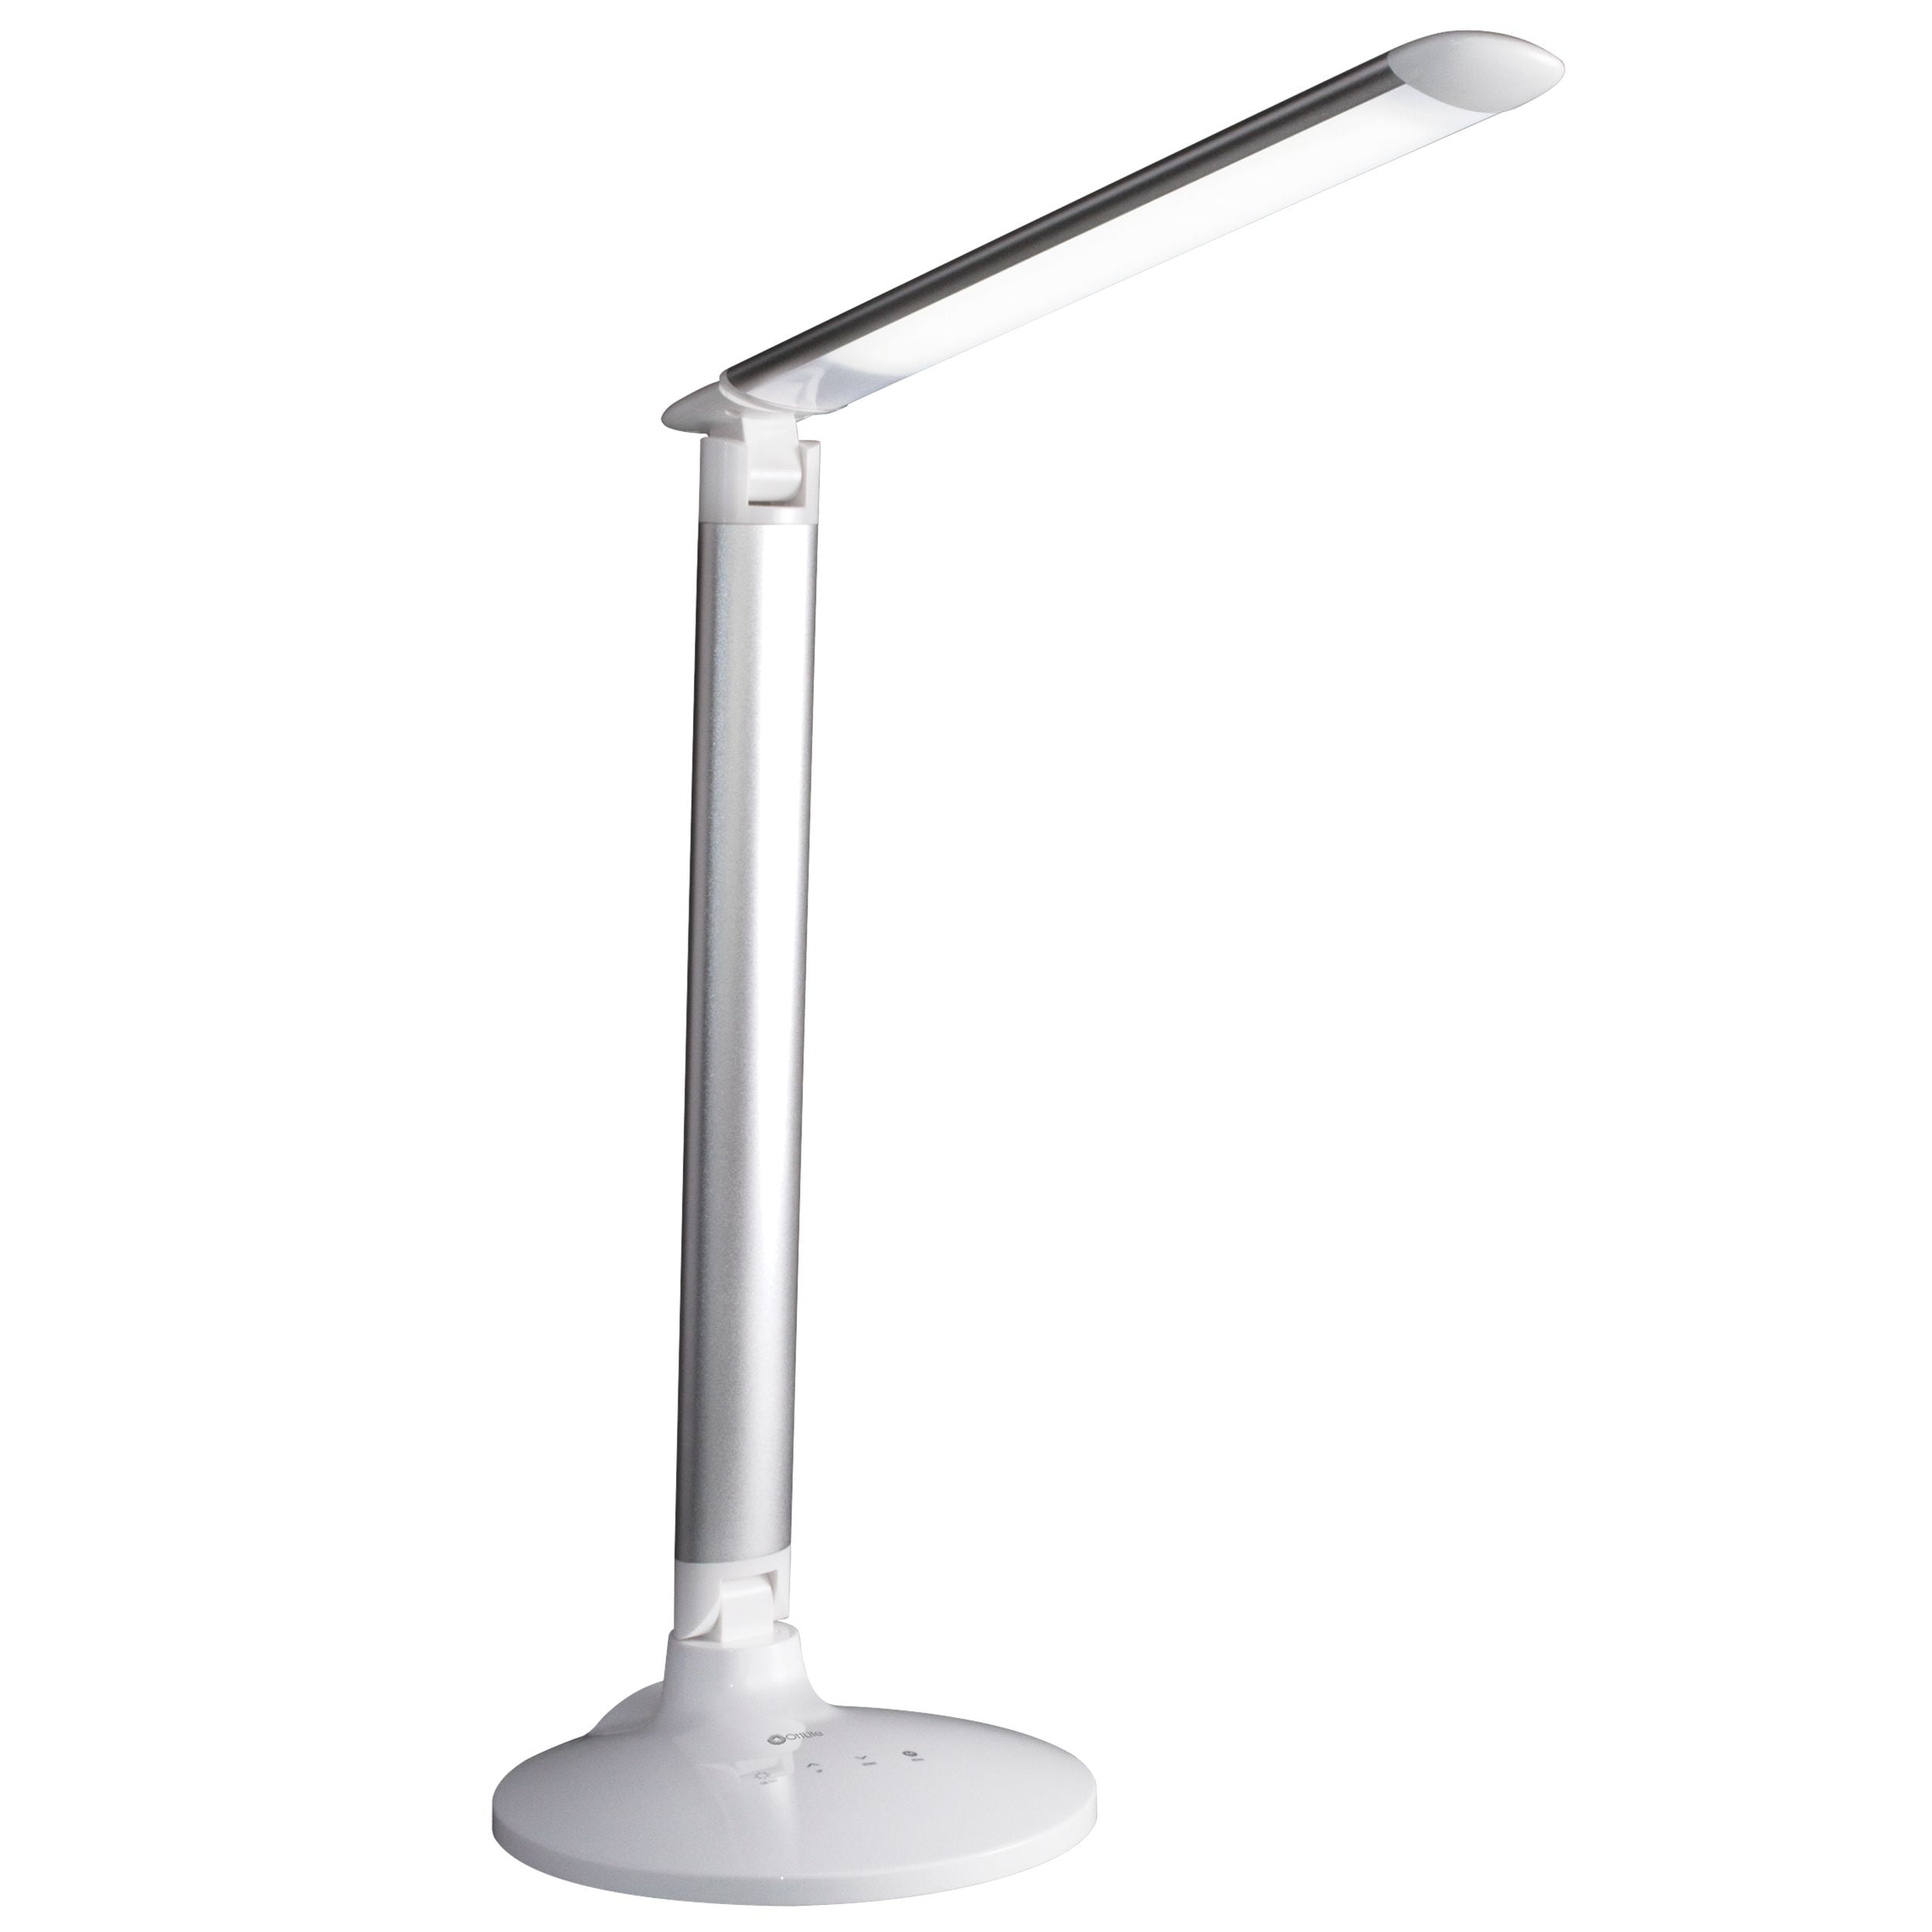 Medicin tricky Tilbagebetale OttLite Command LED Desk Lamp with Voice Assist - White, Google Home and  Amazon Alexa Compatible, USB Charging Port - Walmart.com